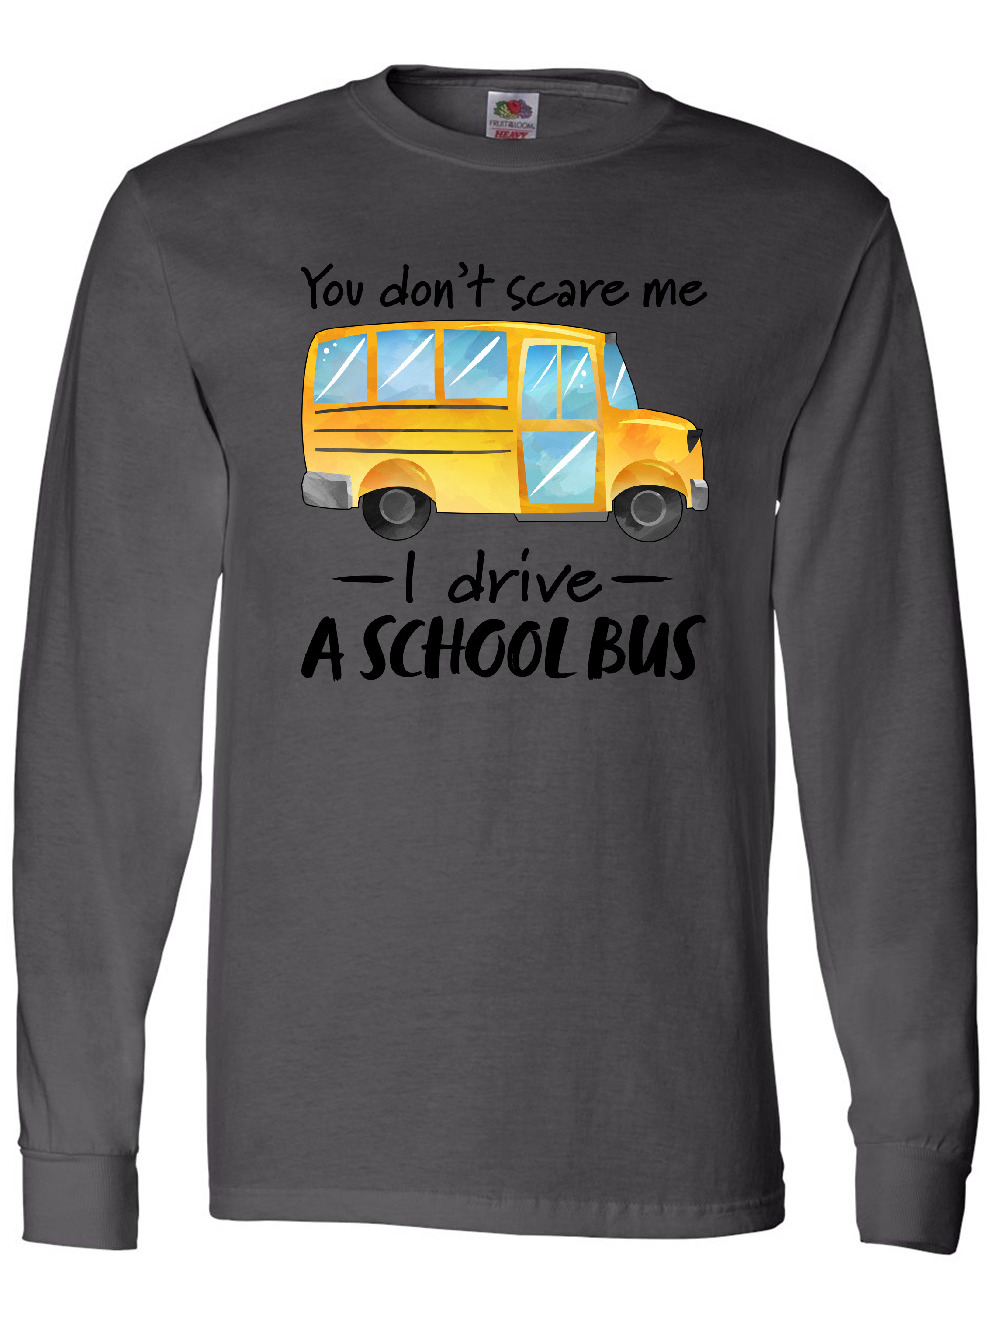 Inktastic You Dont Scare Me- I Drive a School Bus Long Sleeve T-Shirt - image 1 of 4